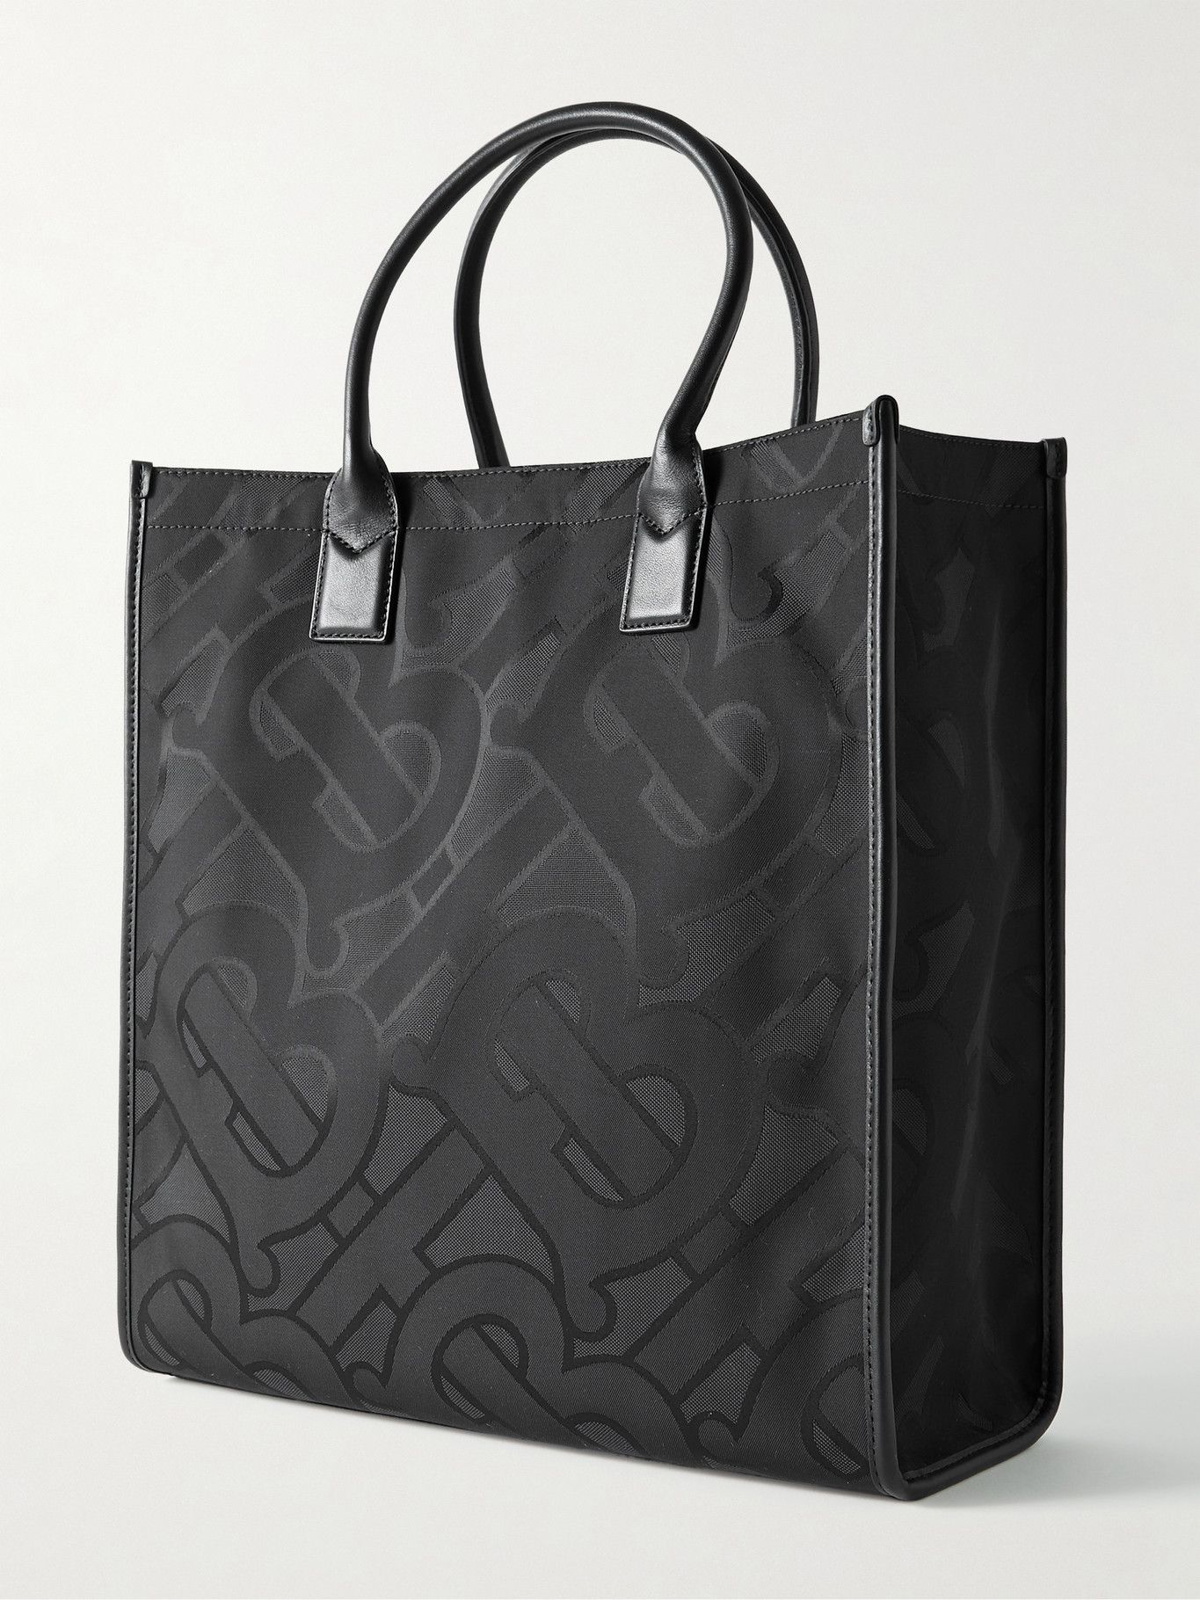 Burberry - Leather-Trimmed Recycled Logo-Jacquard Tote Bag Burberry